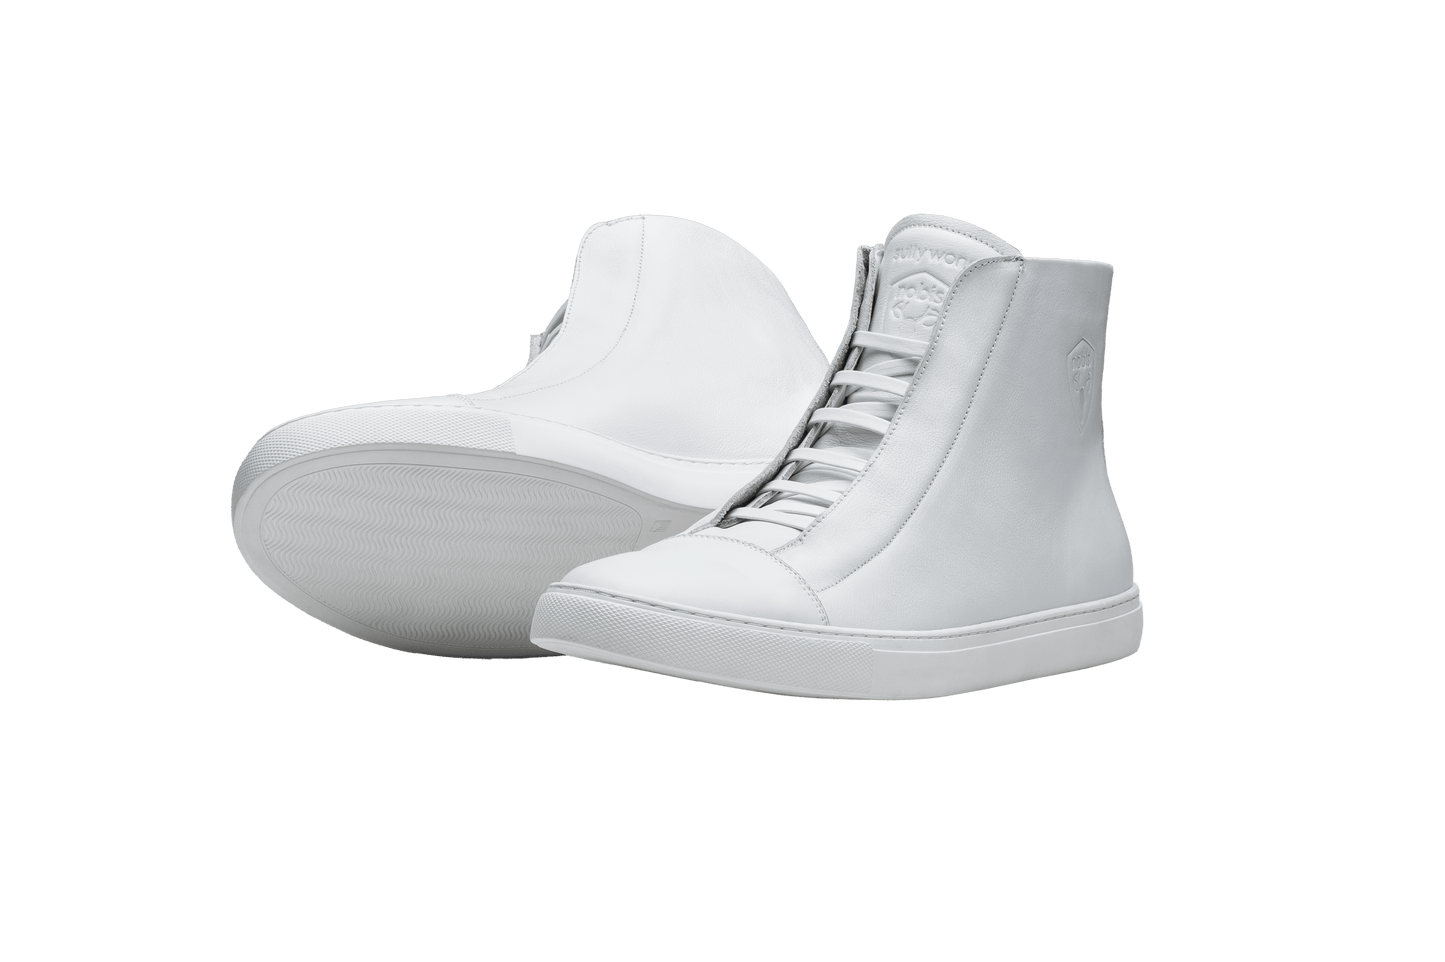 Unisex high top sneaker with Nobis crest embossed on the right side of the shoe in White